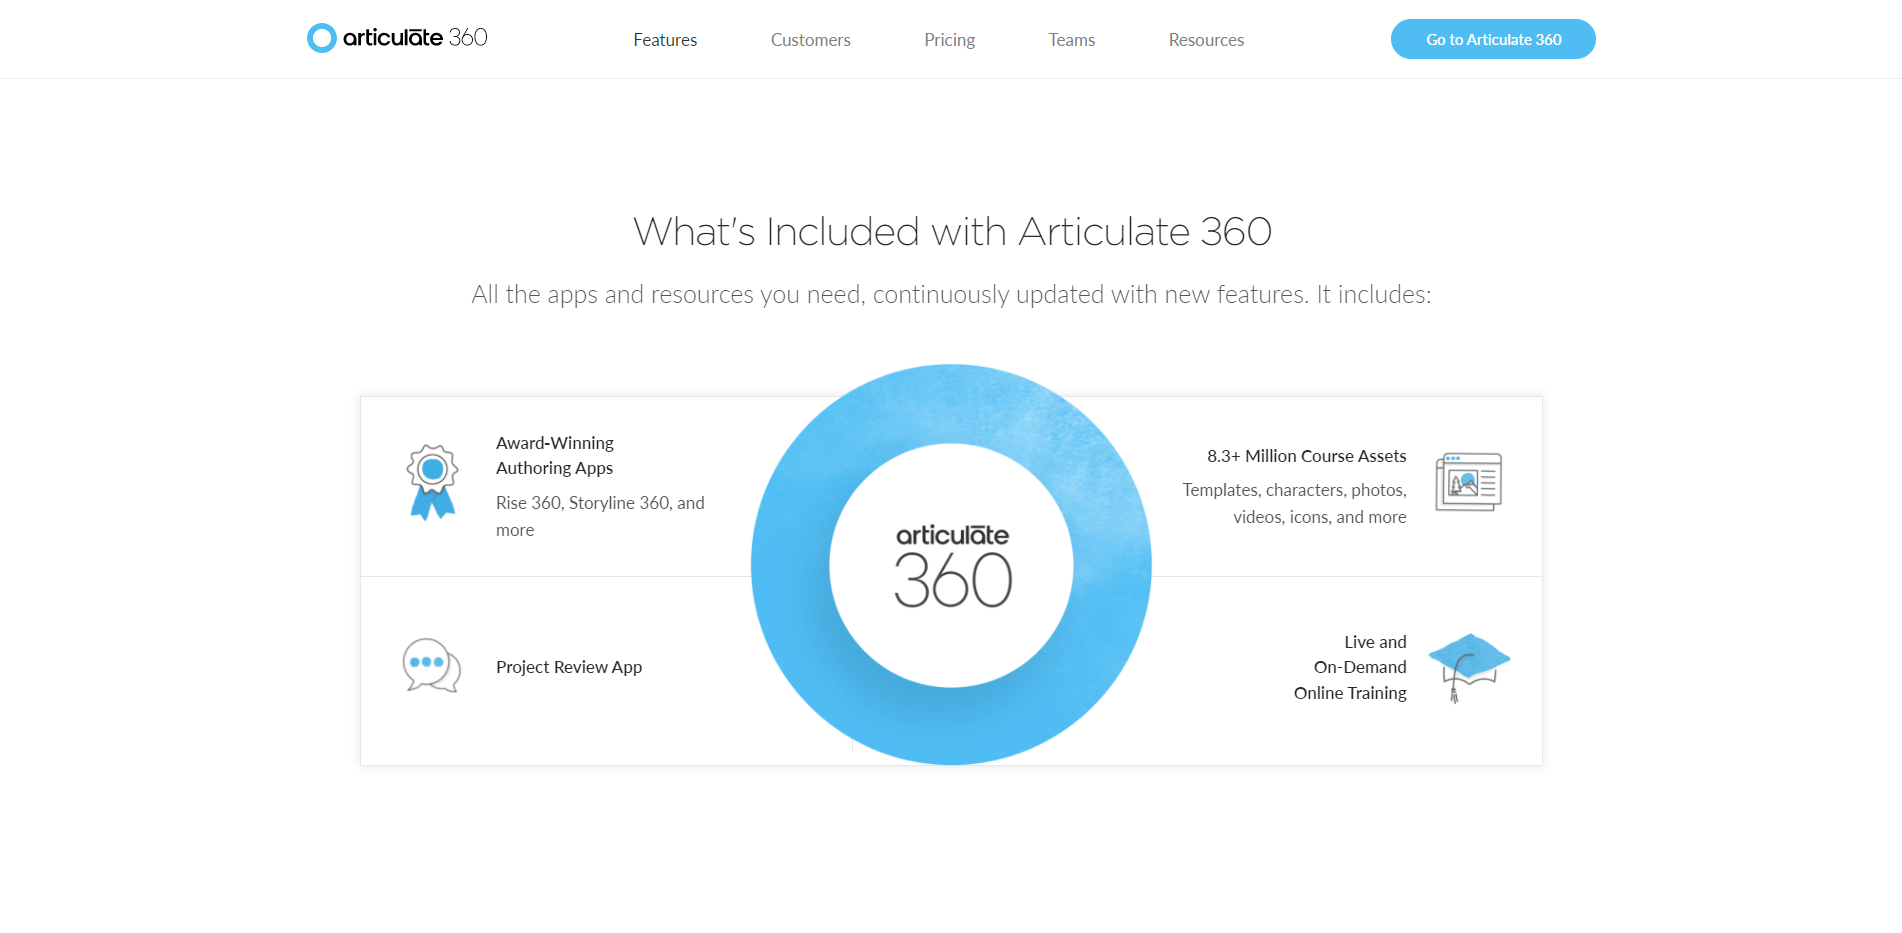 An overview image of the Articulate 360 subscription.